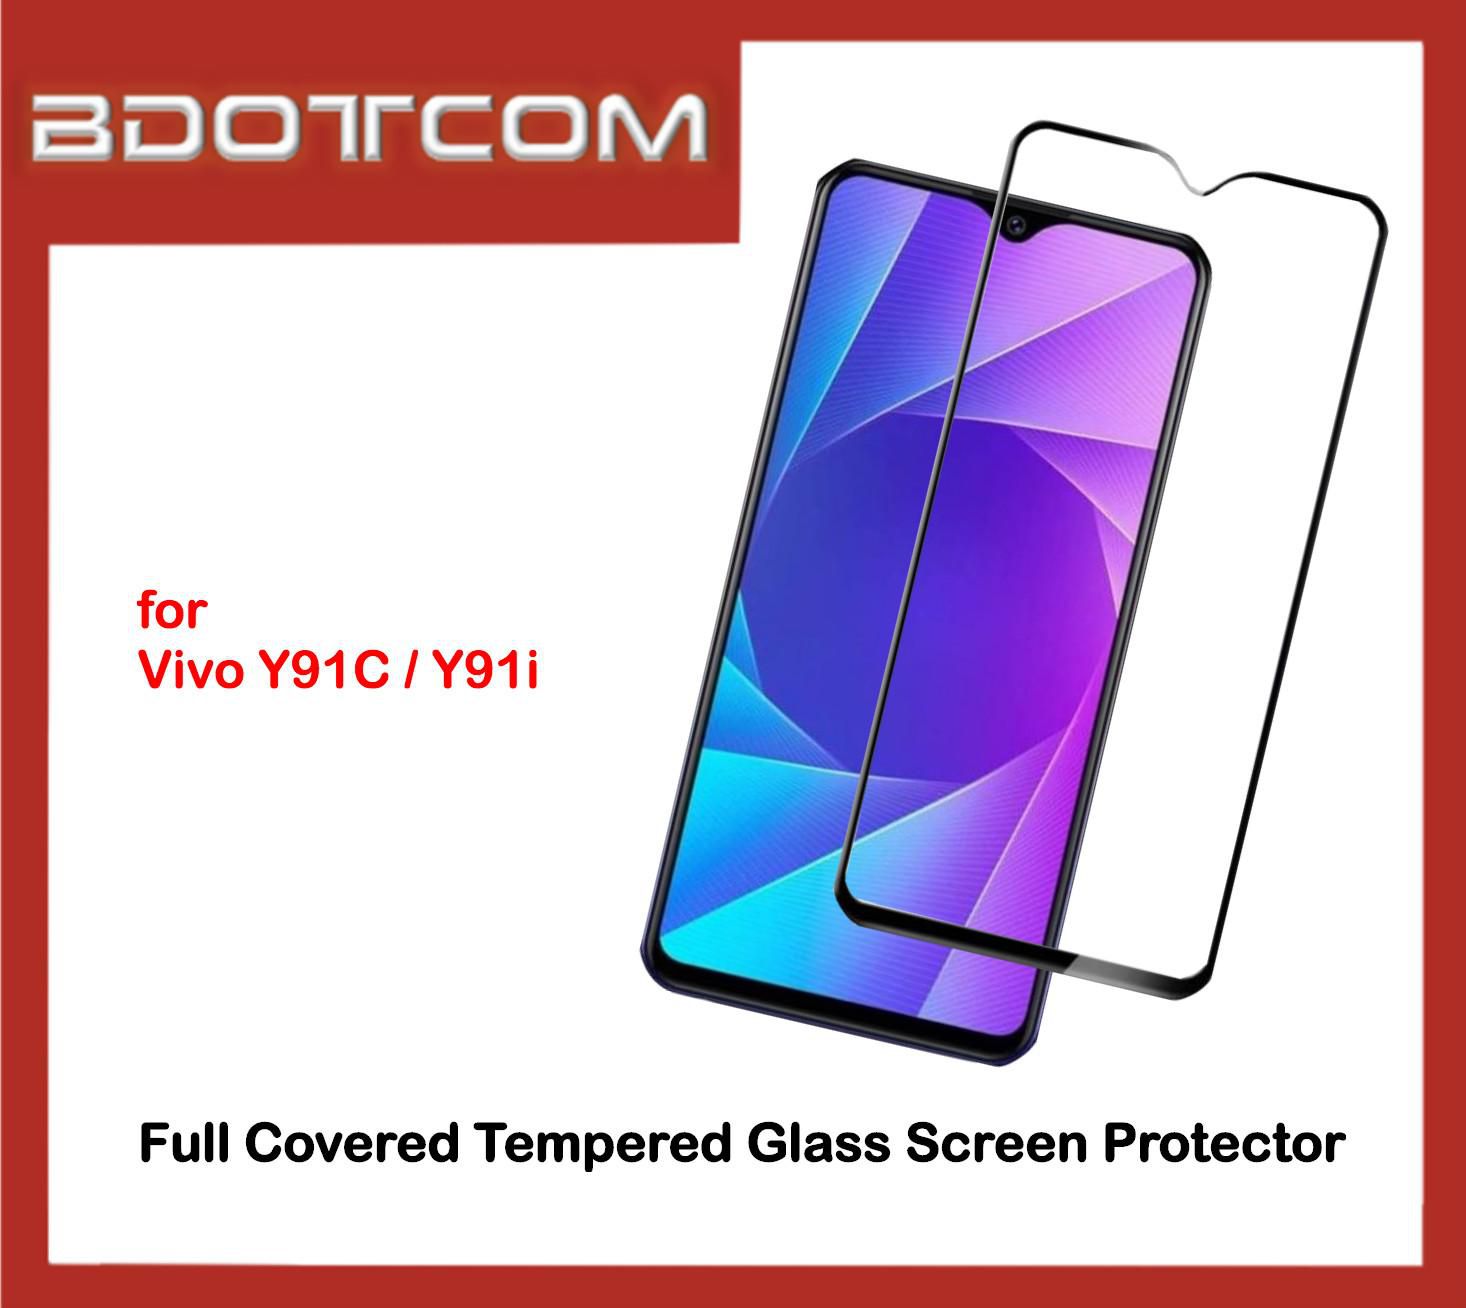 Bdotcom Full Covered Tempered Glass Screen Protector for Vivo Y91C (Black)